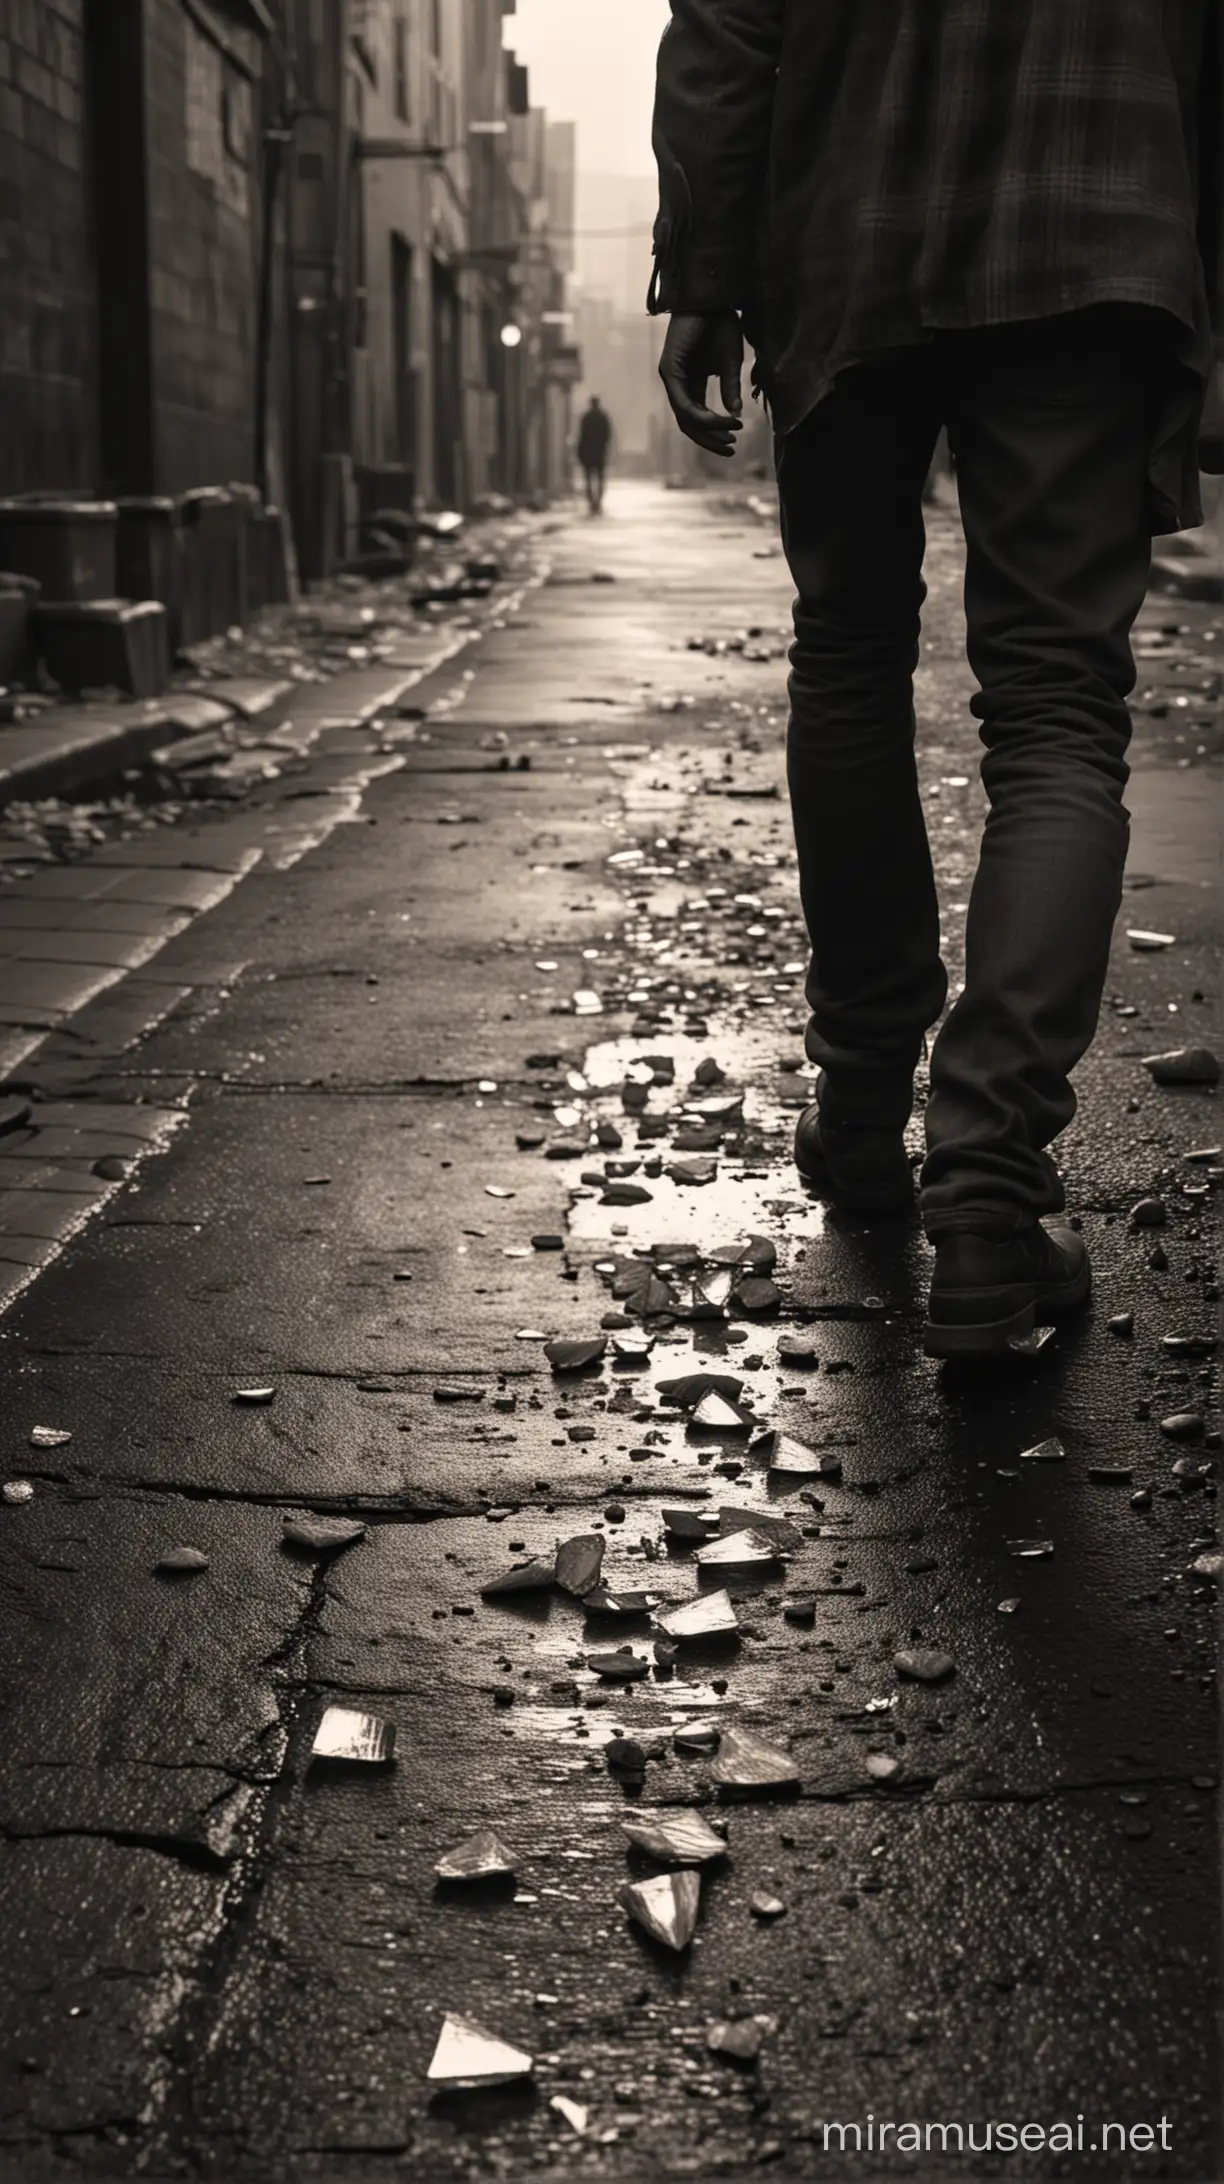 a haggard man with tattered clothes stumbling in dark alley with broken road, nails and broken glass on the road, no light, dark, cinematic, 4K, hyper-realistic, photo from the back, extremely dark, red and sephia ambiance, two white cups spilling coffee on the ground